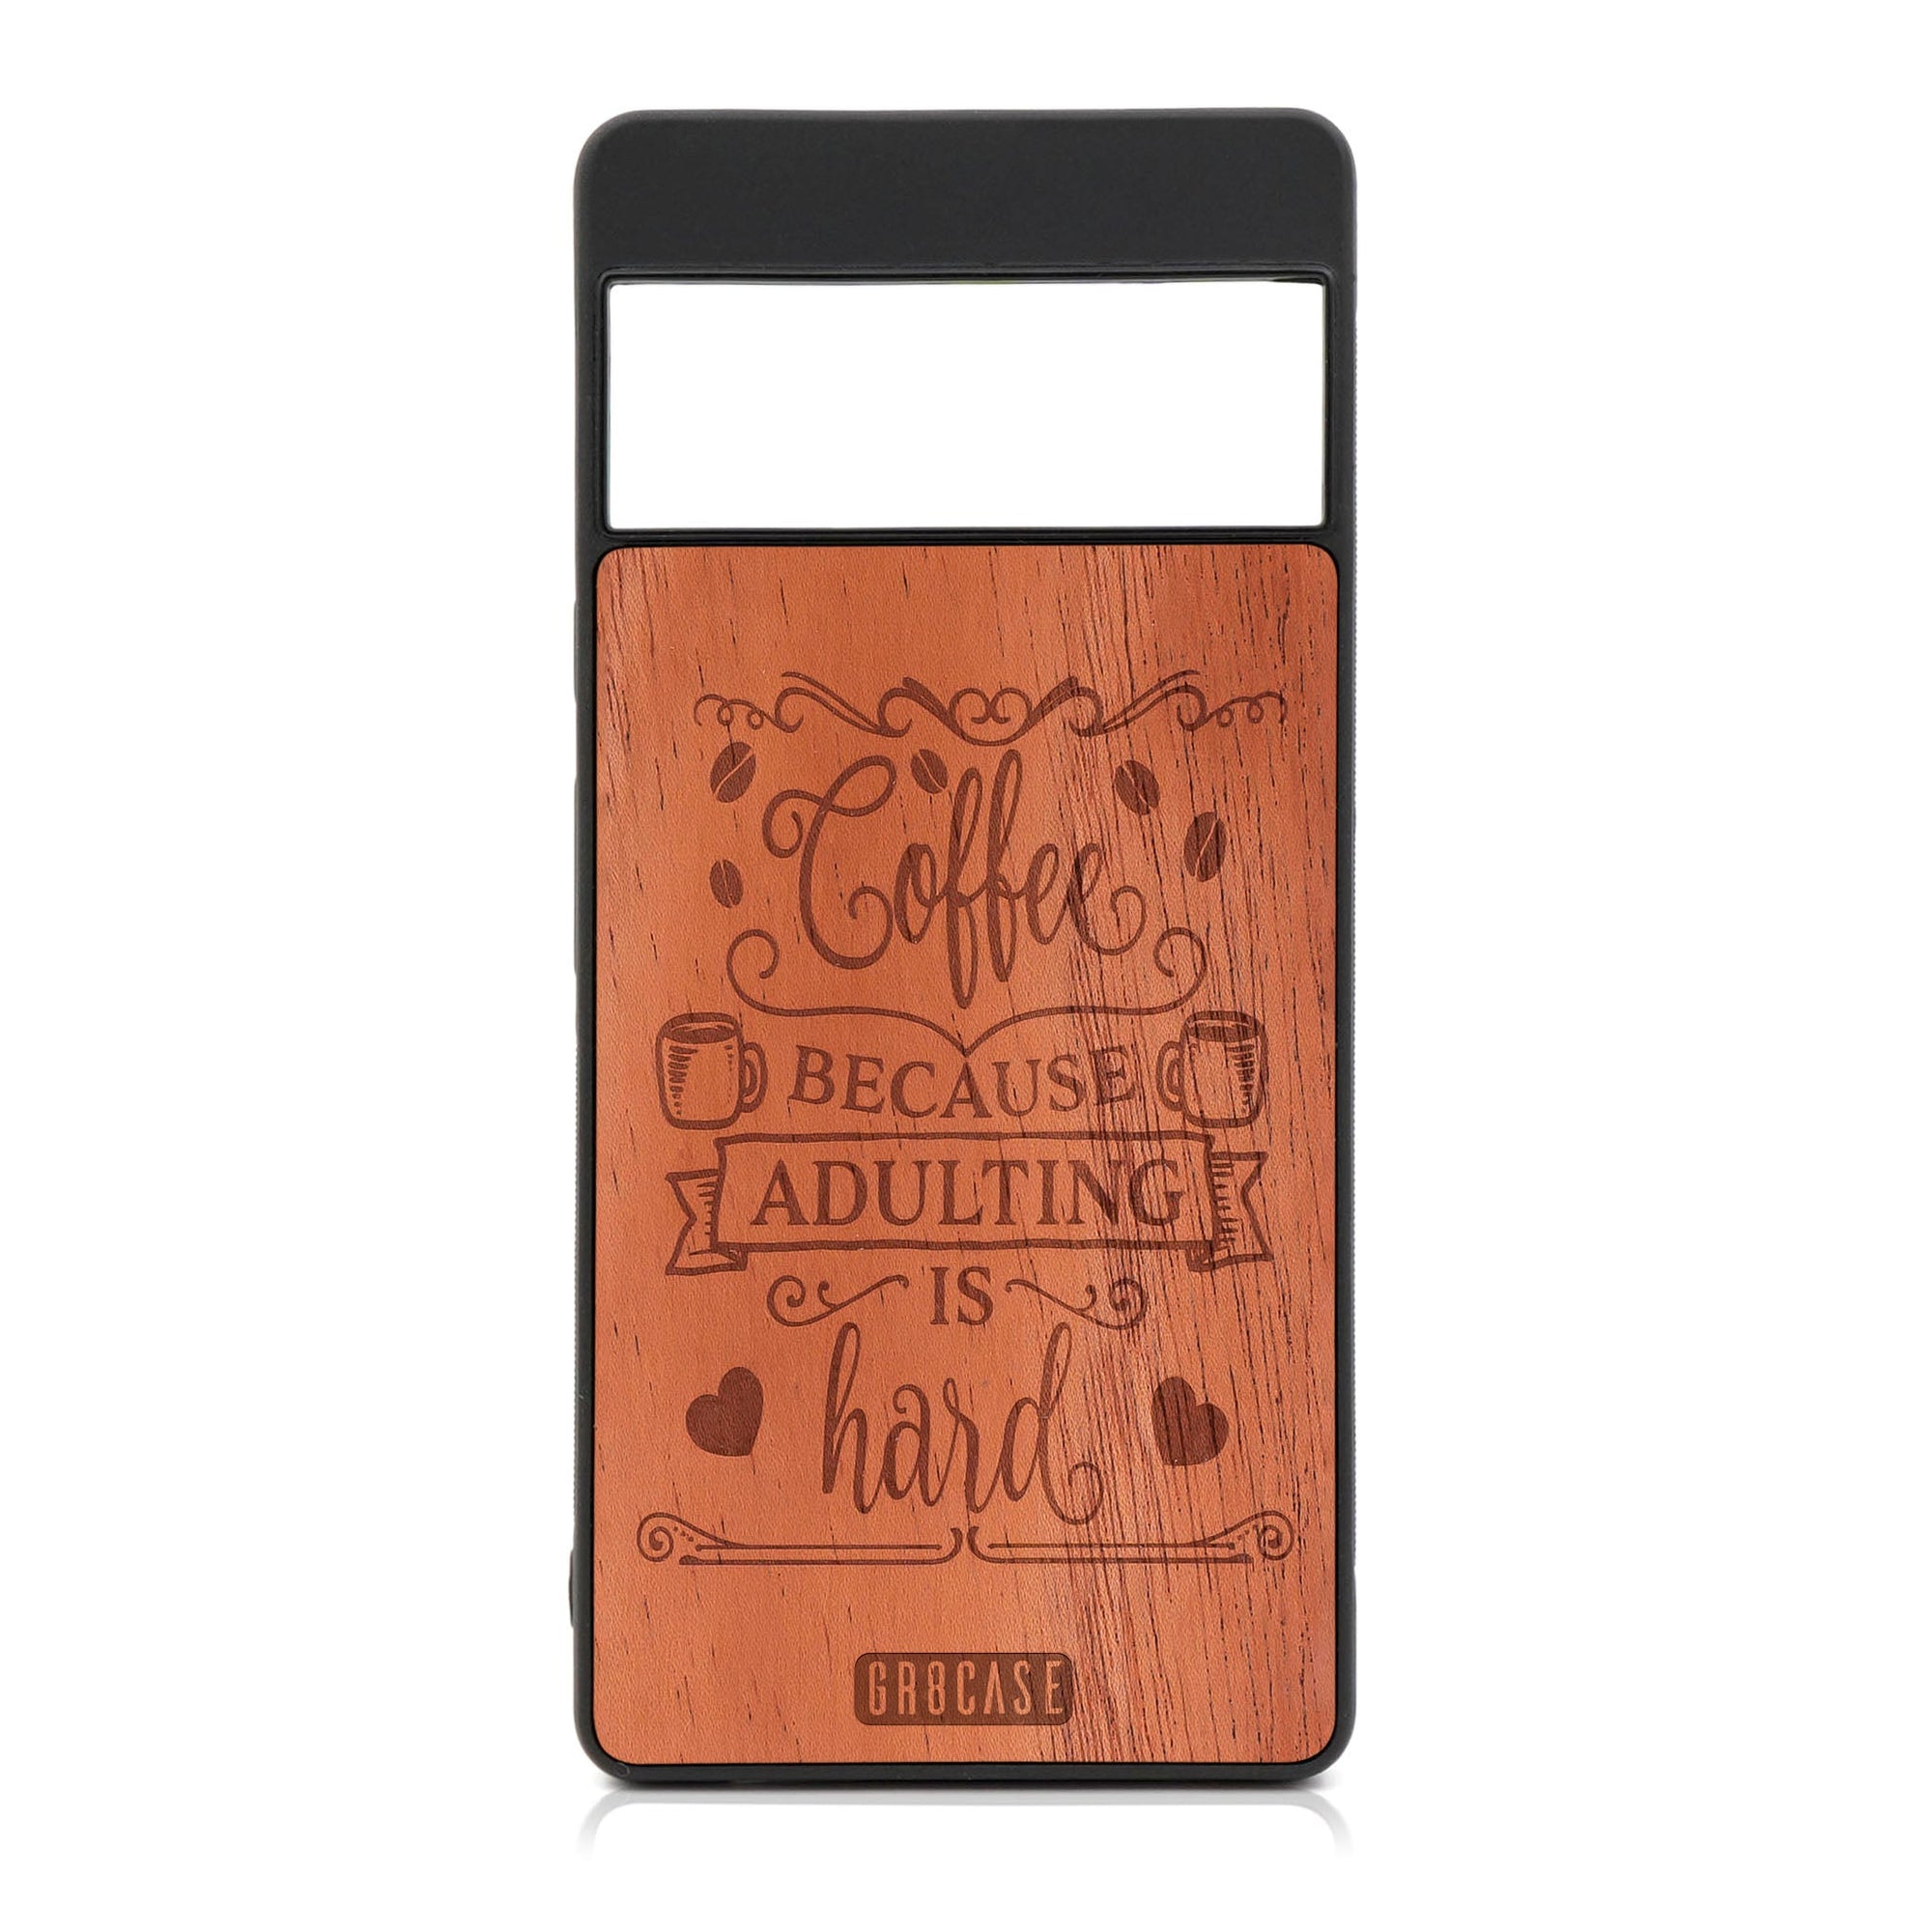 Coffee Because Adulting Is Hard Design Wood Case For Google Pixel 6 Pro